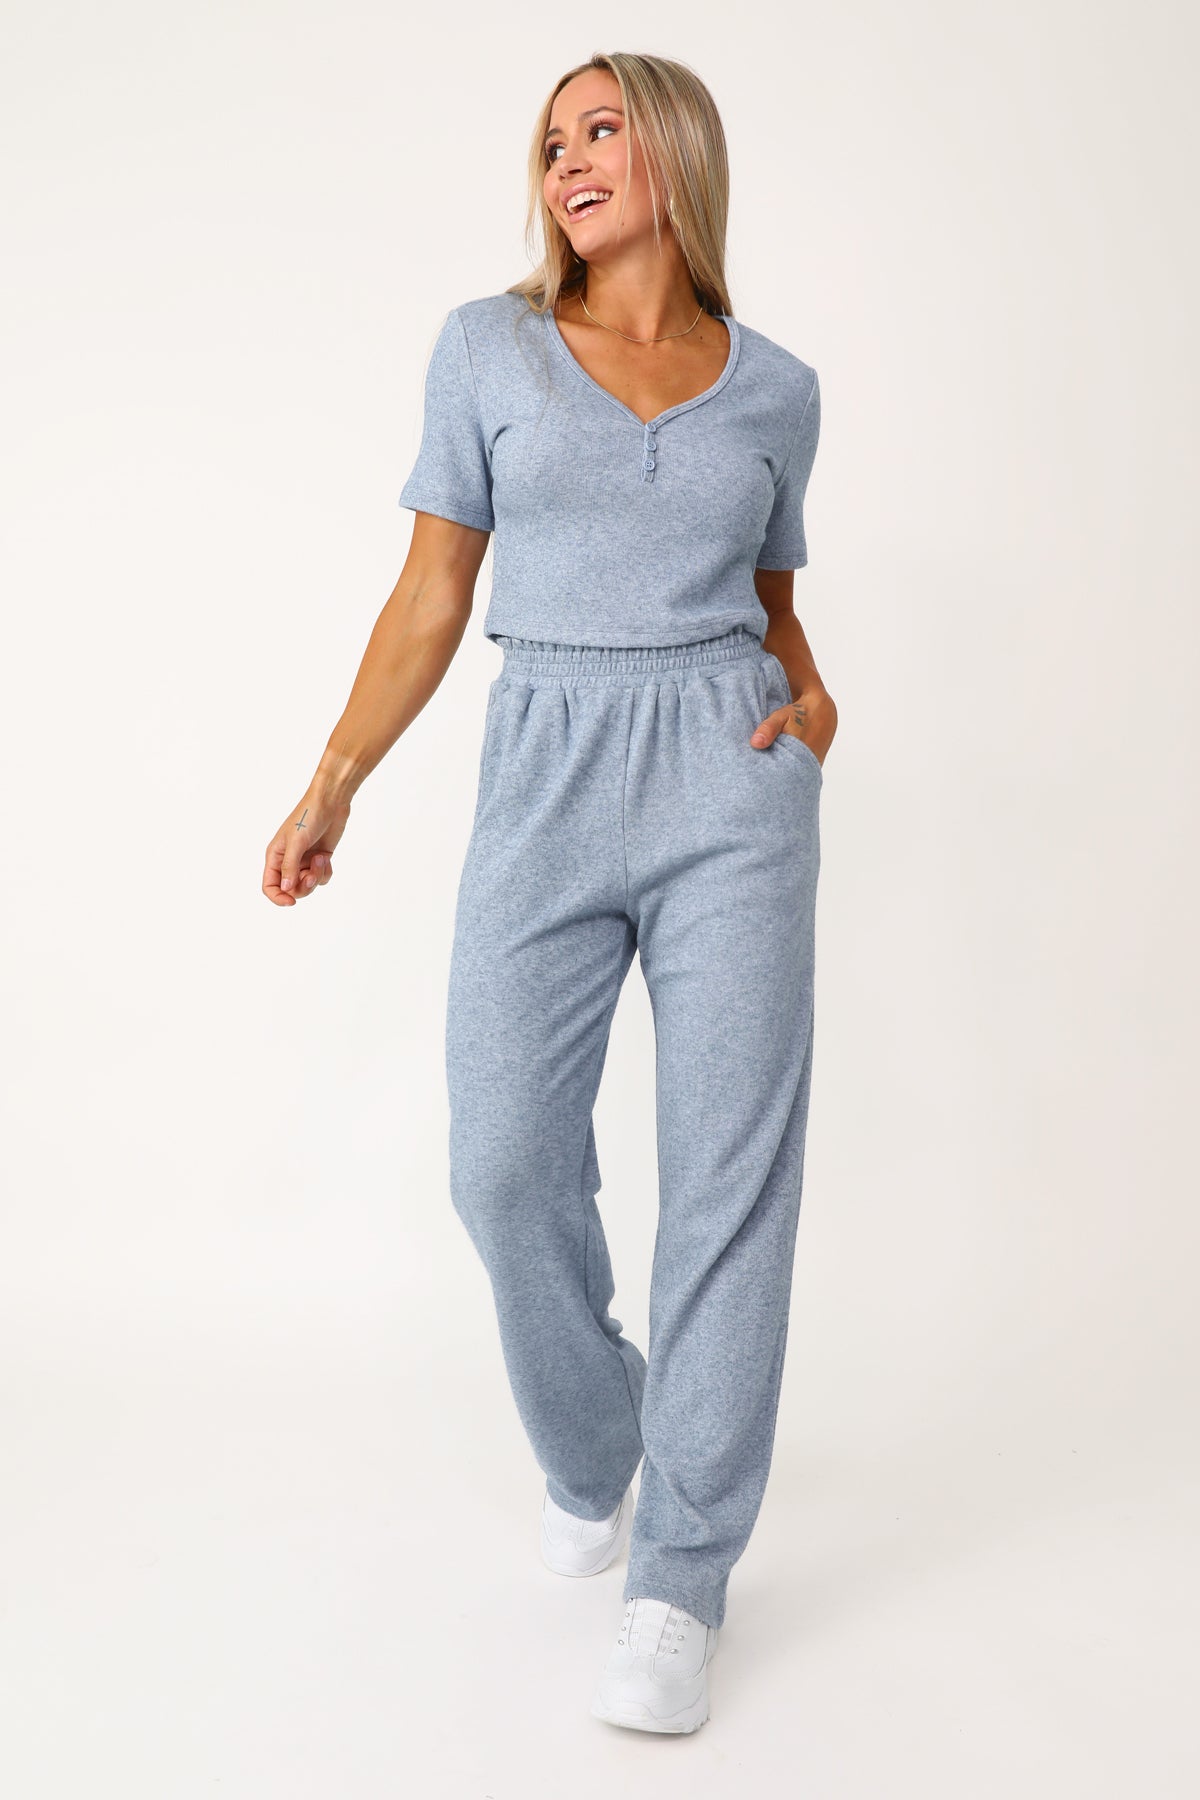 Model wearing the Self Care blue lounge pant.